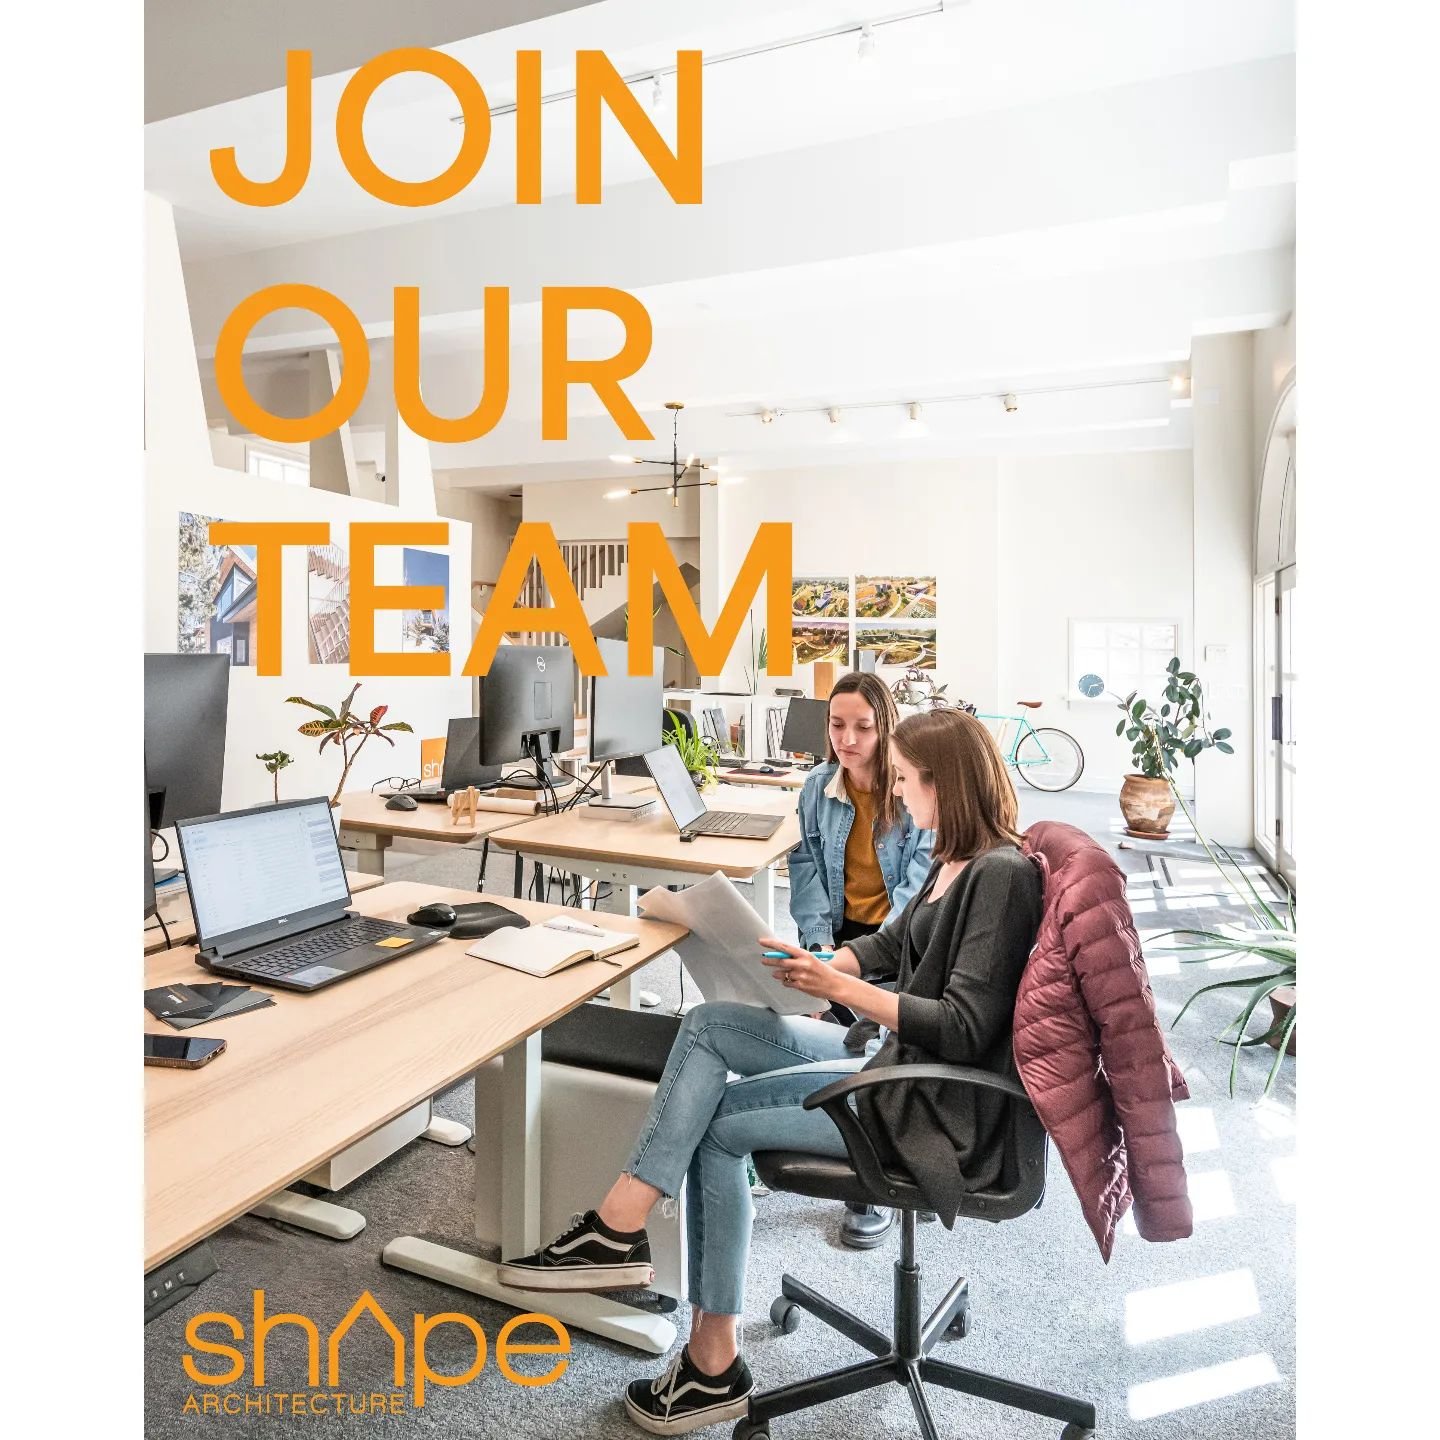 We're looking for a marketing manager to help us with proposals, web, socials, and making awesome graphics.

If that sounds like you, check the link in our bio!

#hiring #jointheteam #shapearchitect #denvercolorado